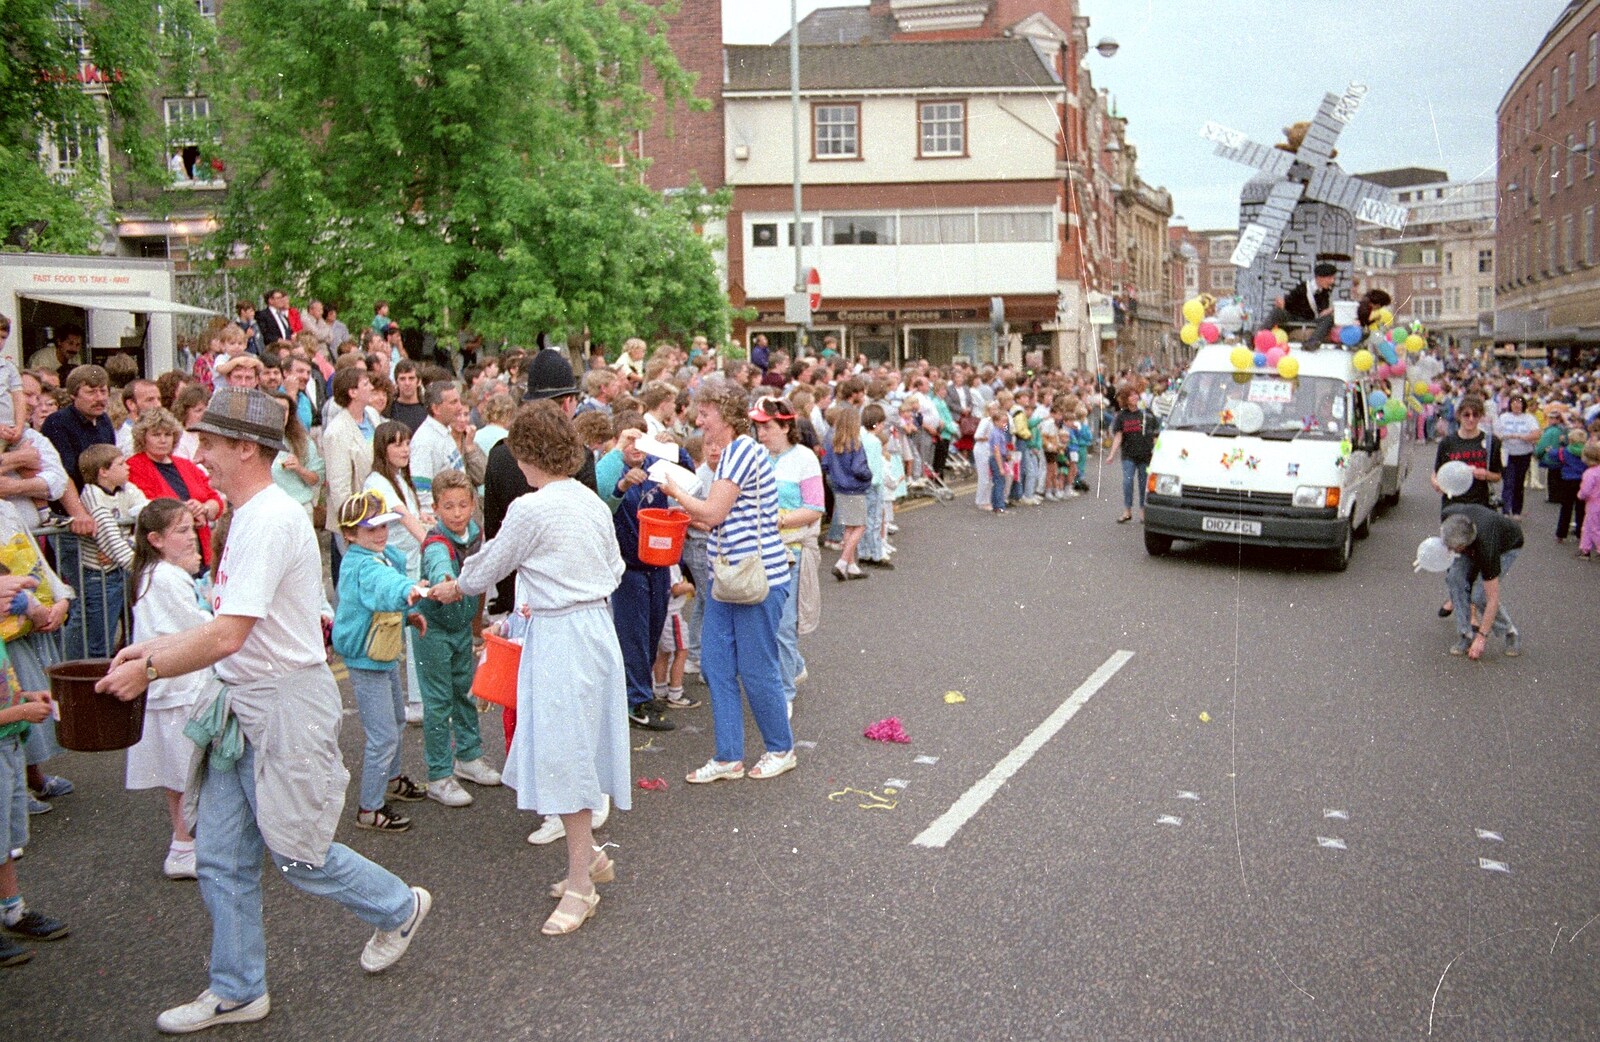 The windmill heads further up St. Stephen's from Soman-Wherry and the Lord Mayor's Parade, Norwich - 3rd May 1988